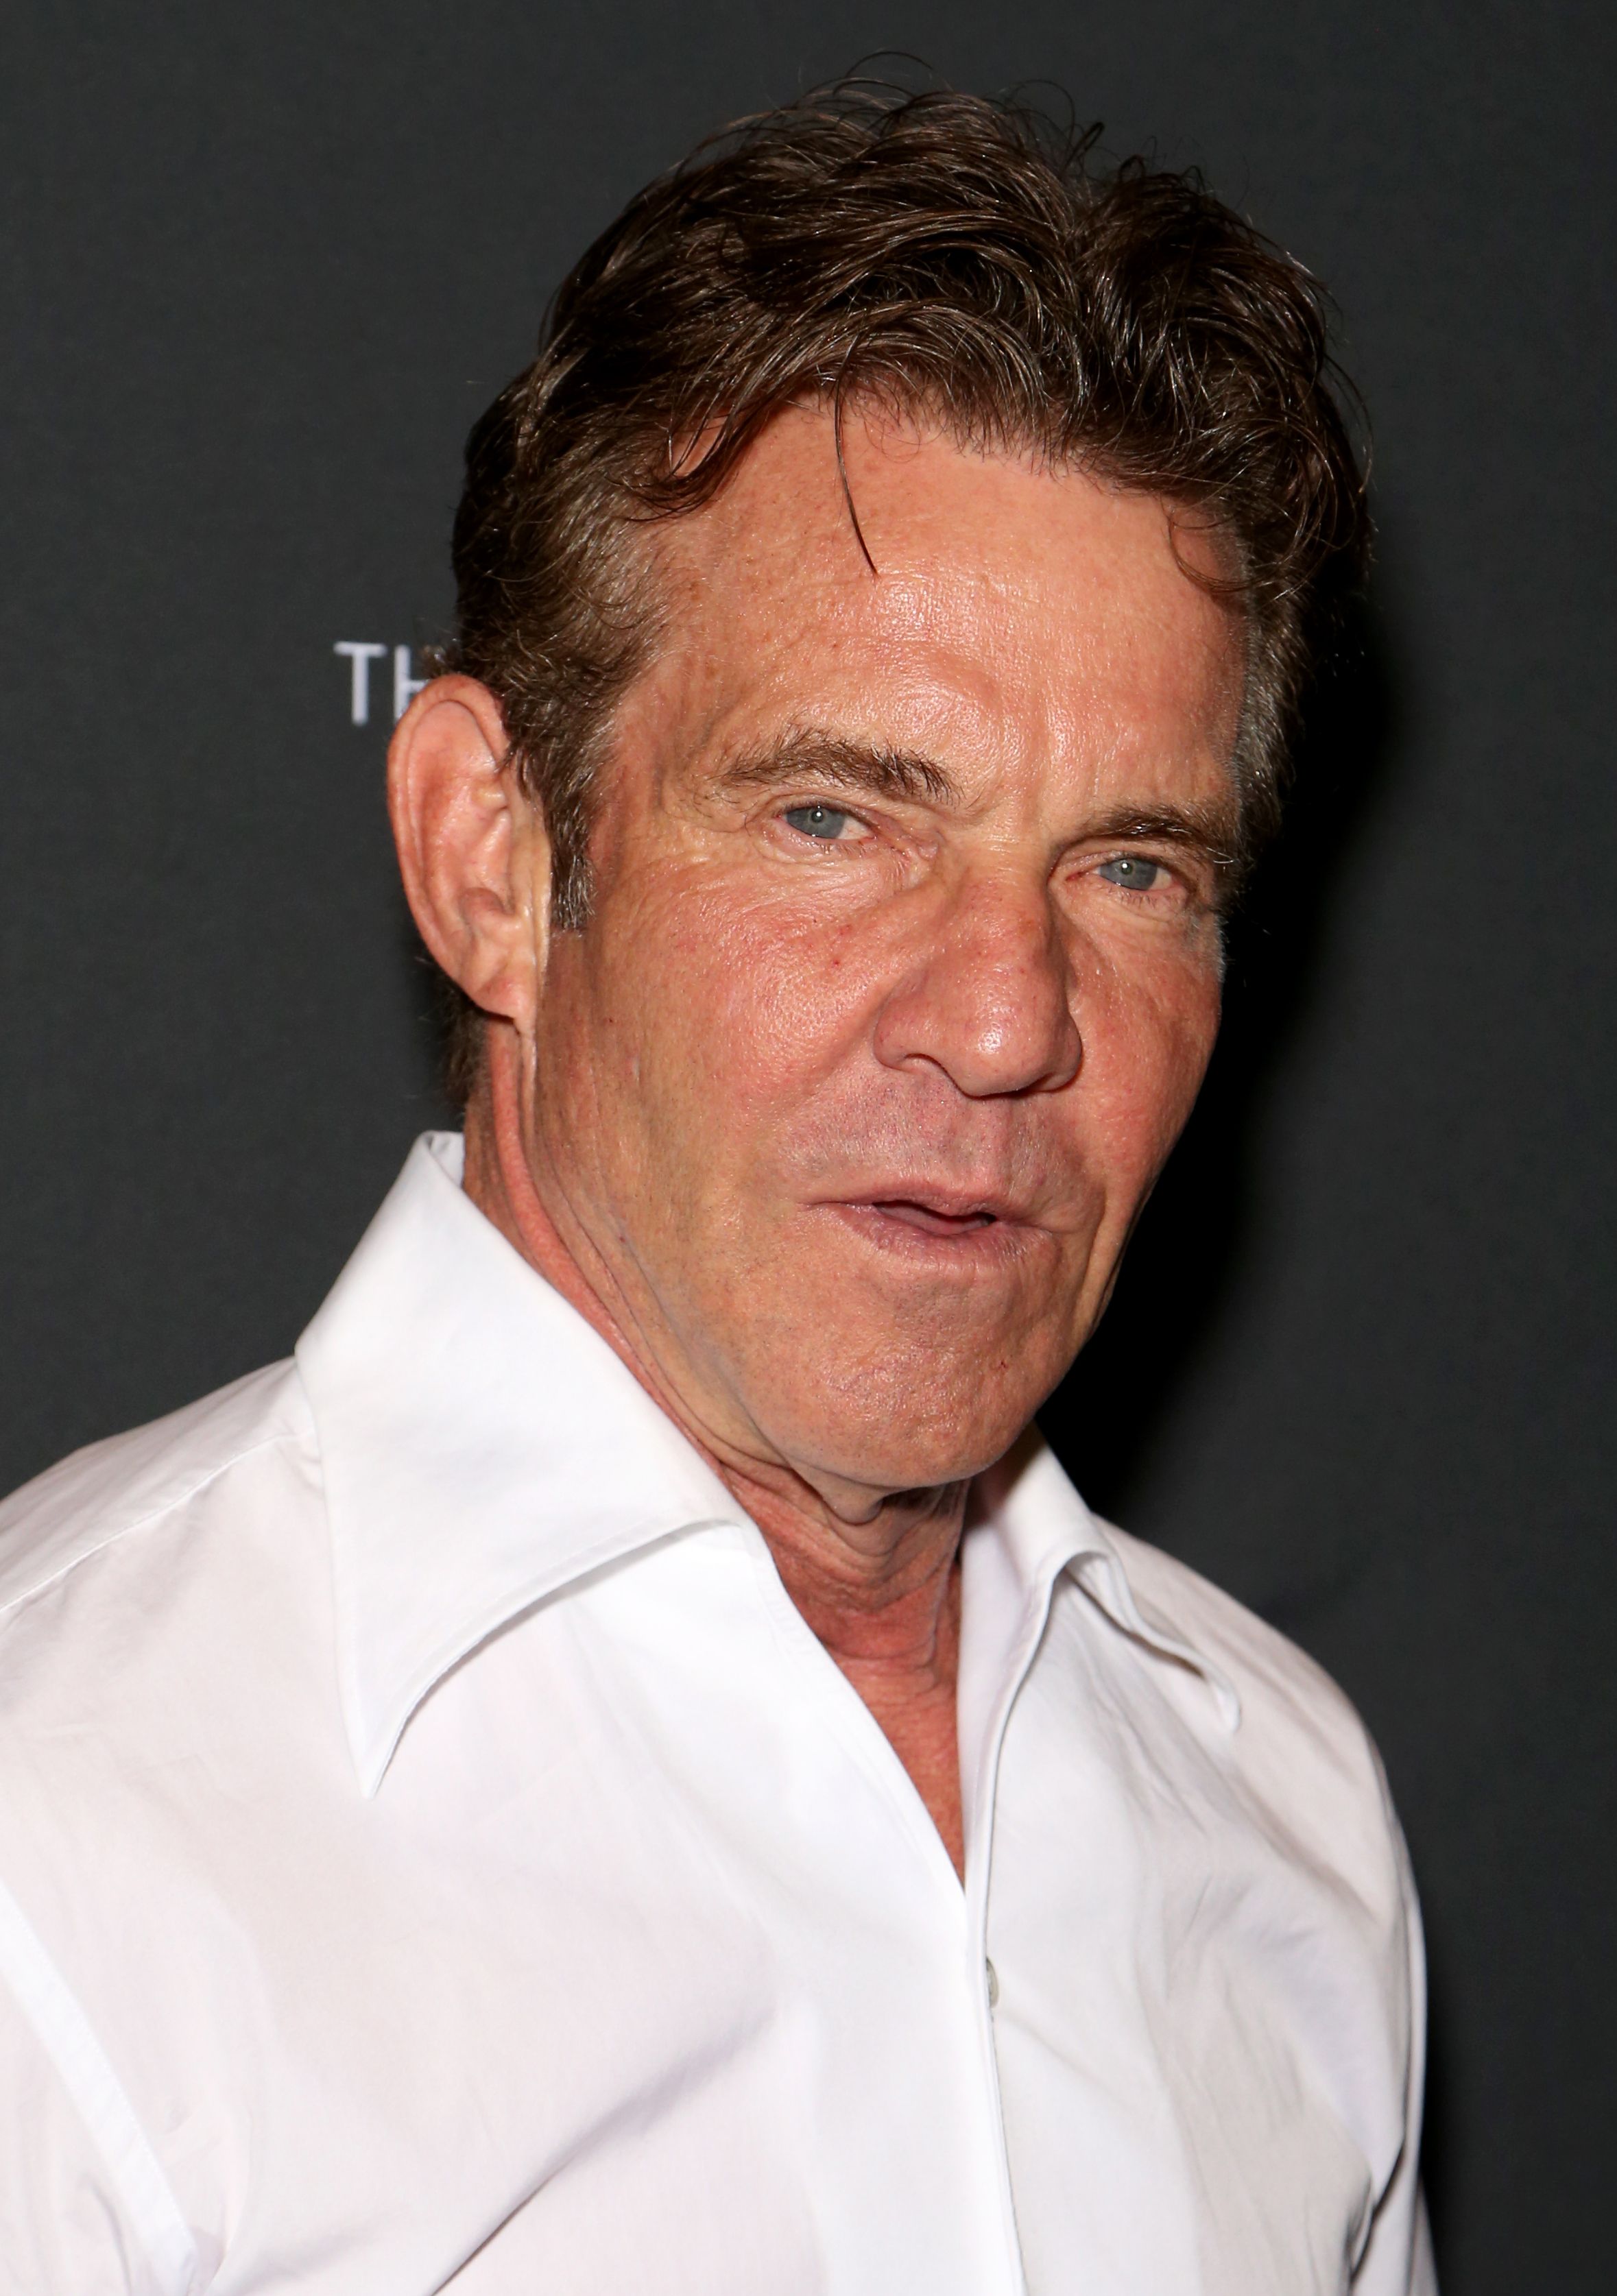 Dennis Quaid attends "Dennis Quaid and The Sharks at The Barbershop Cuts & Cocktails at The Cosmopolitan" of Las Vegas on May 11, 2019. | Photo: Getty Images